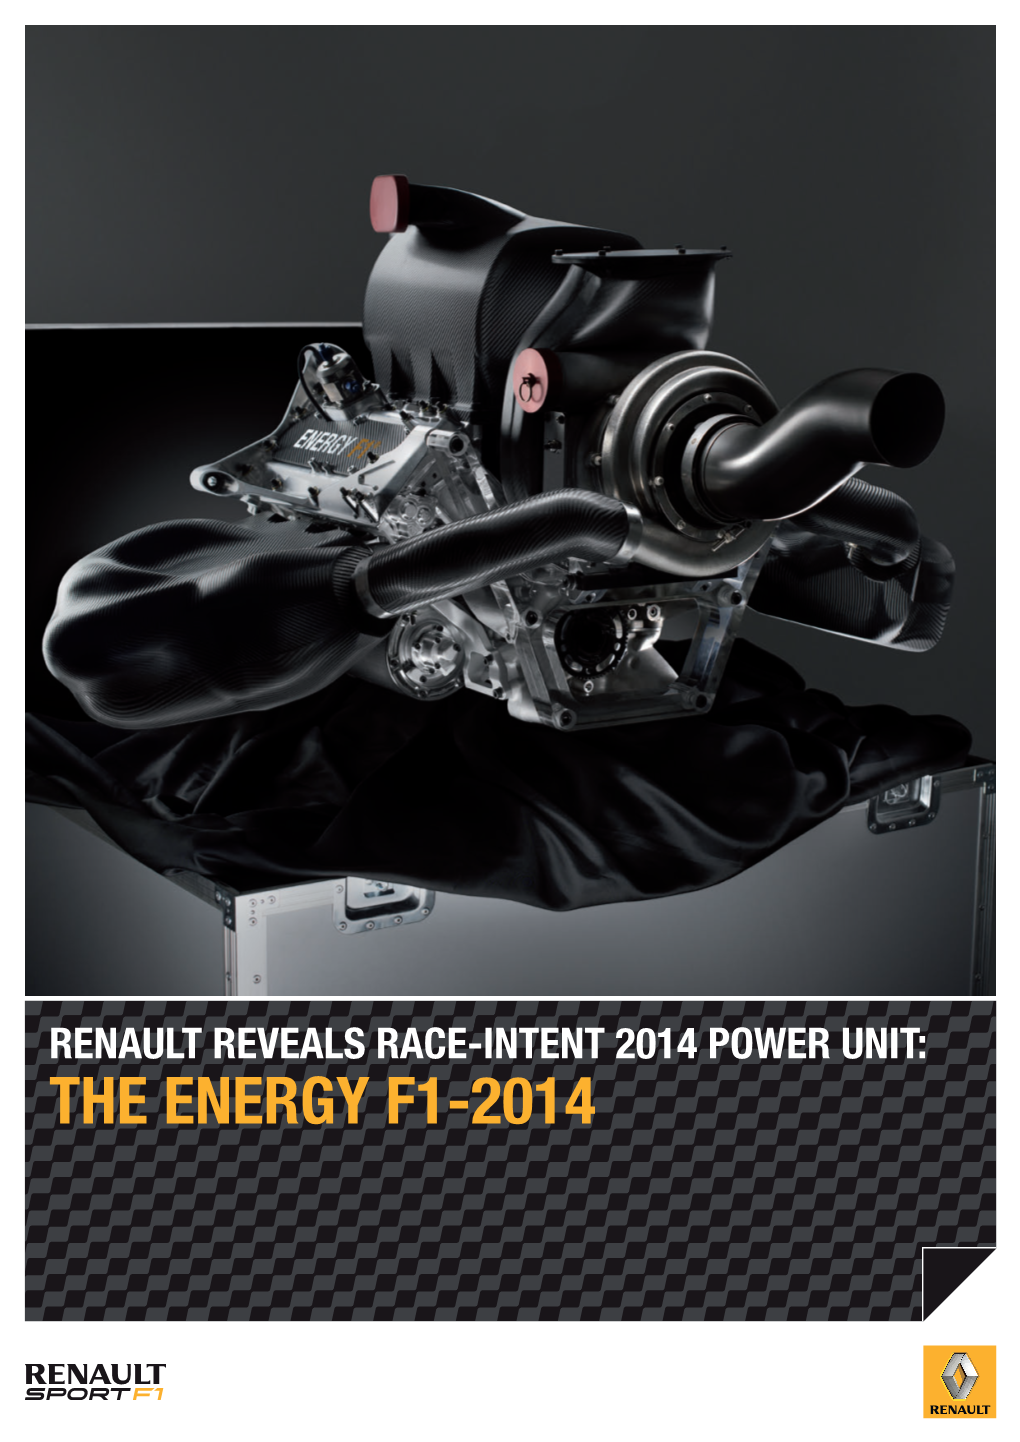 The Energy F1-2014 01 08 Introduction Energy Management 02 09 2014: What Are the Rules? Key Personnel